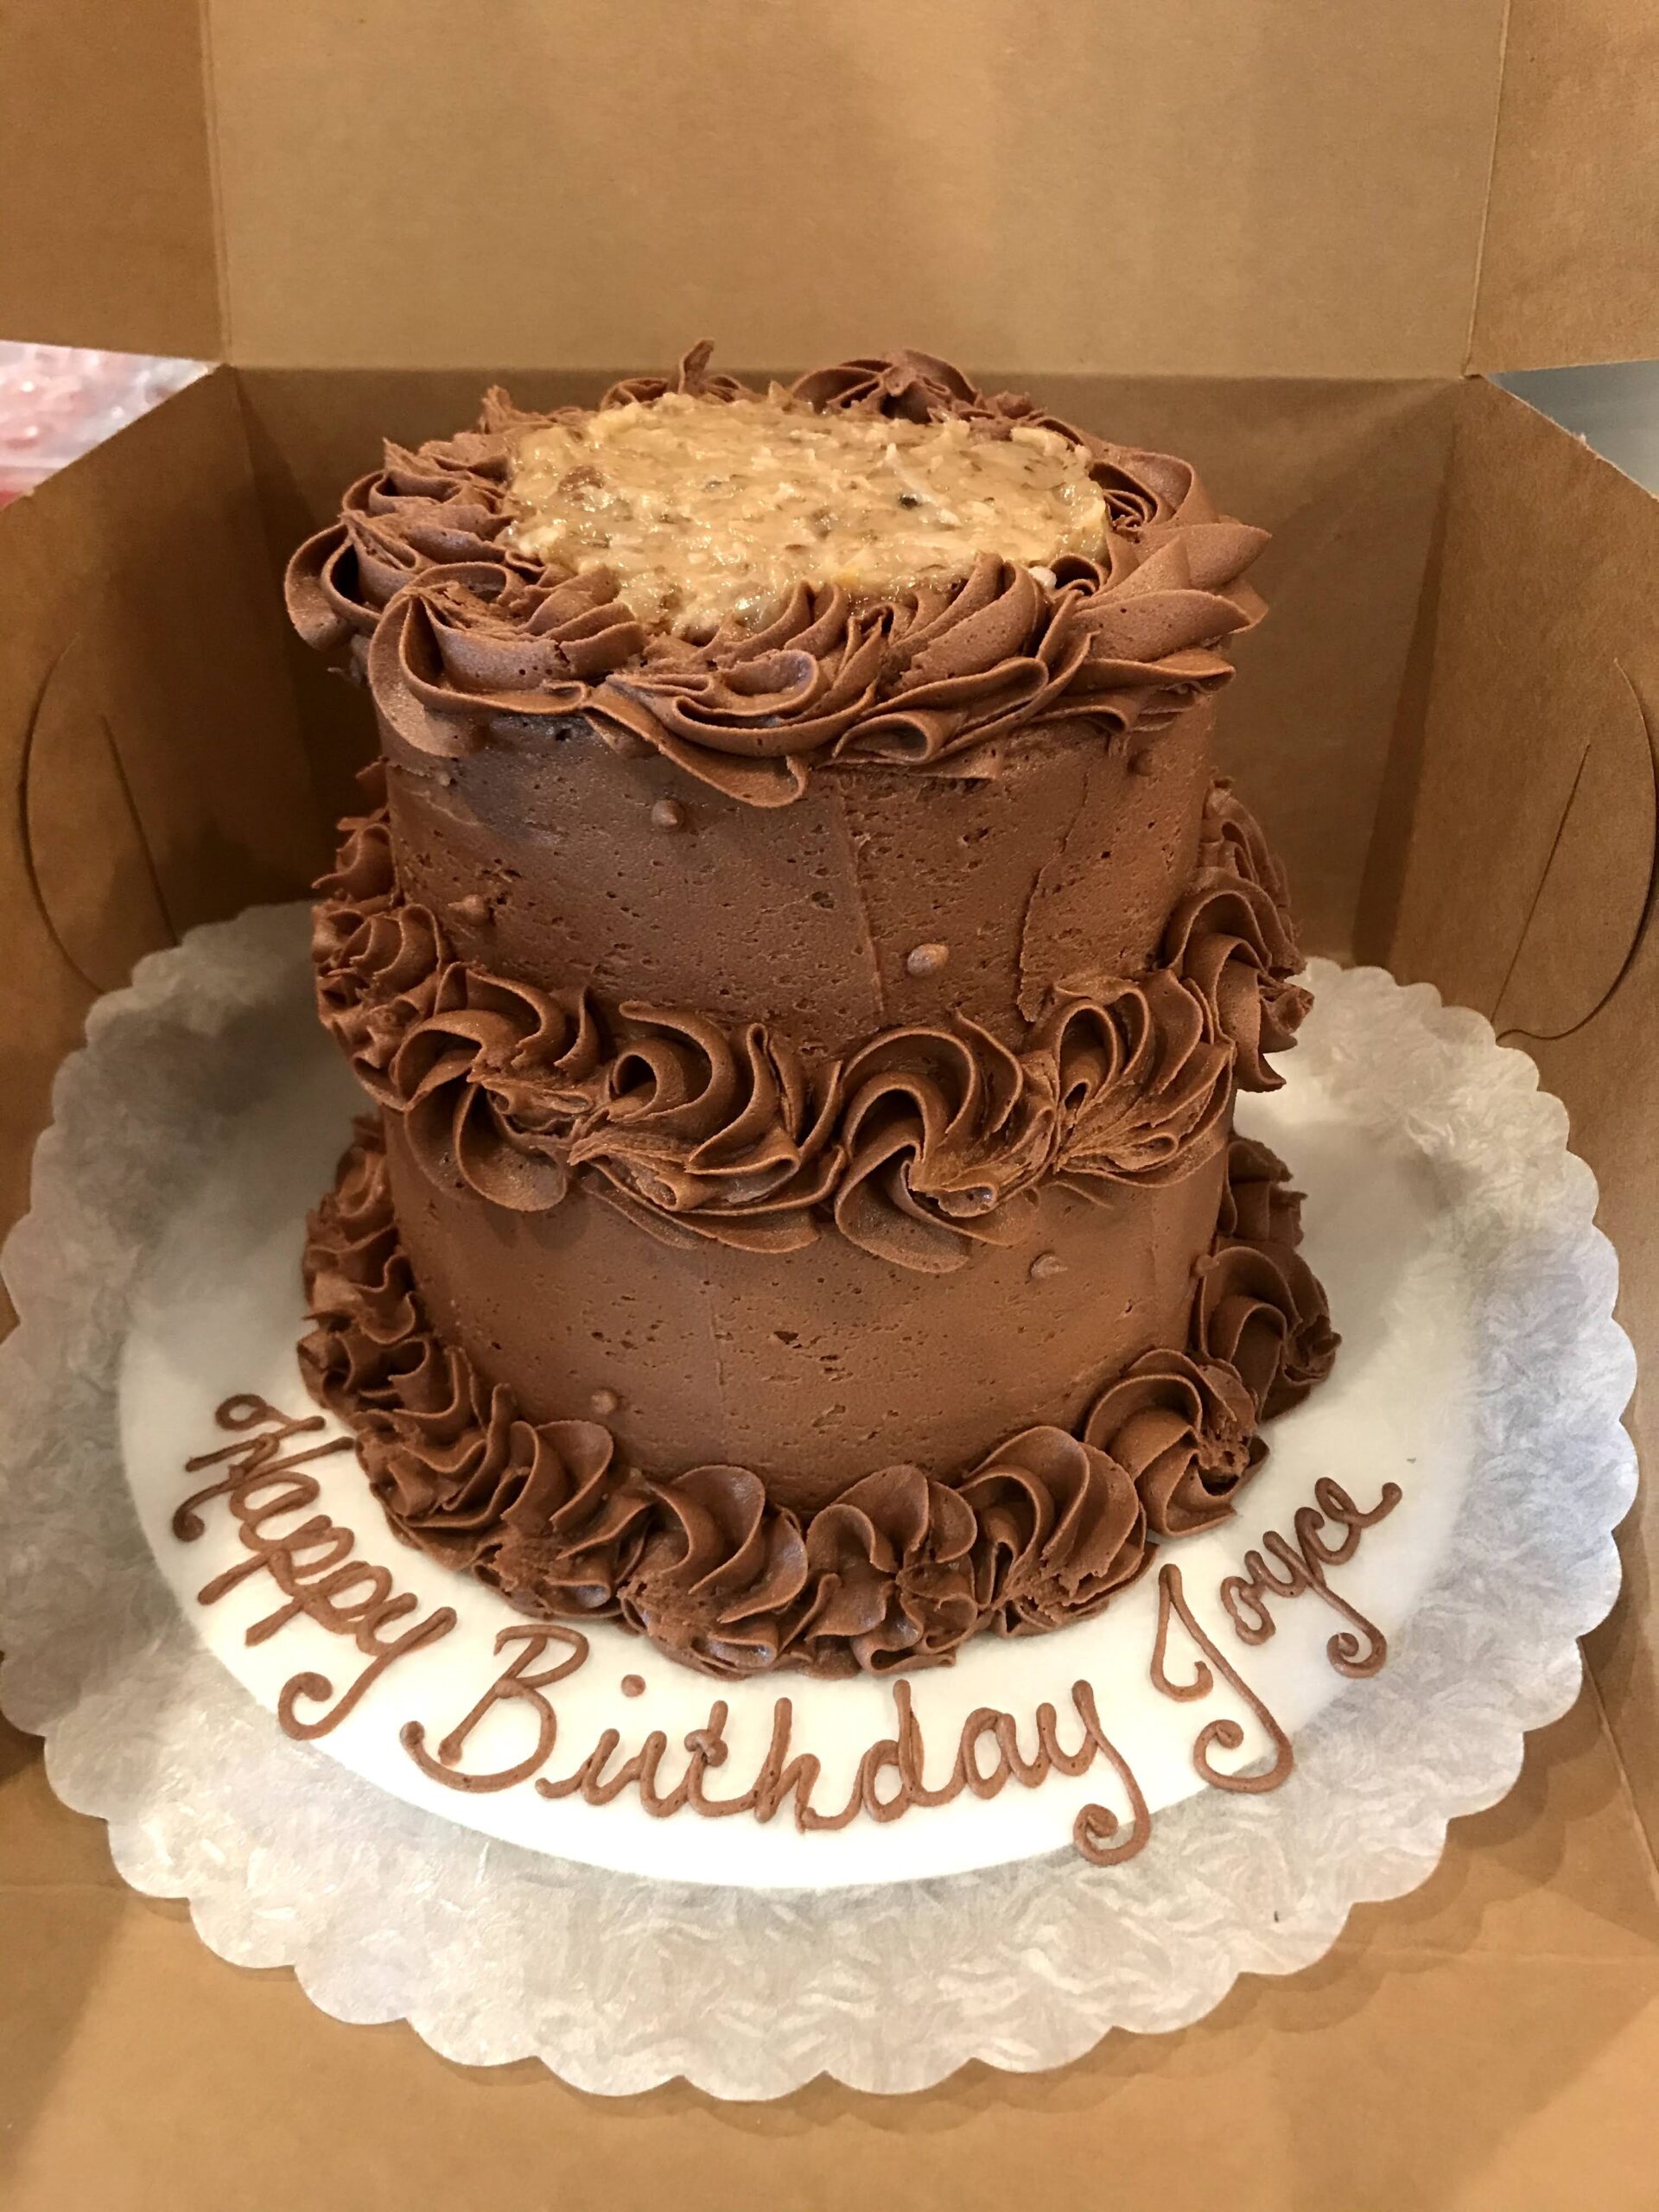 Sal's Bakery on Instagram: Louis Vuitton Birthday Cake! #louisvuittoncake  #birthdaycake #happybirthday #salsbakery #bakery #statenisland  #statenislandbakery #cakes #caketrends #delicious #yummy #buttercream